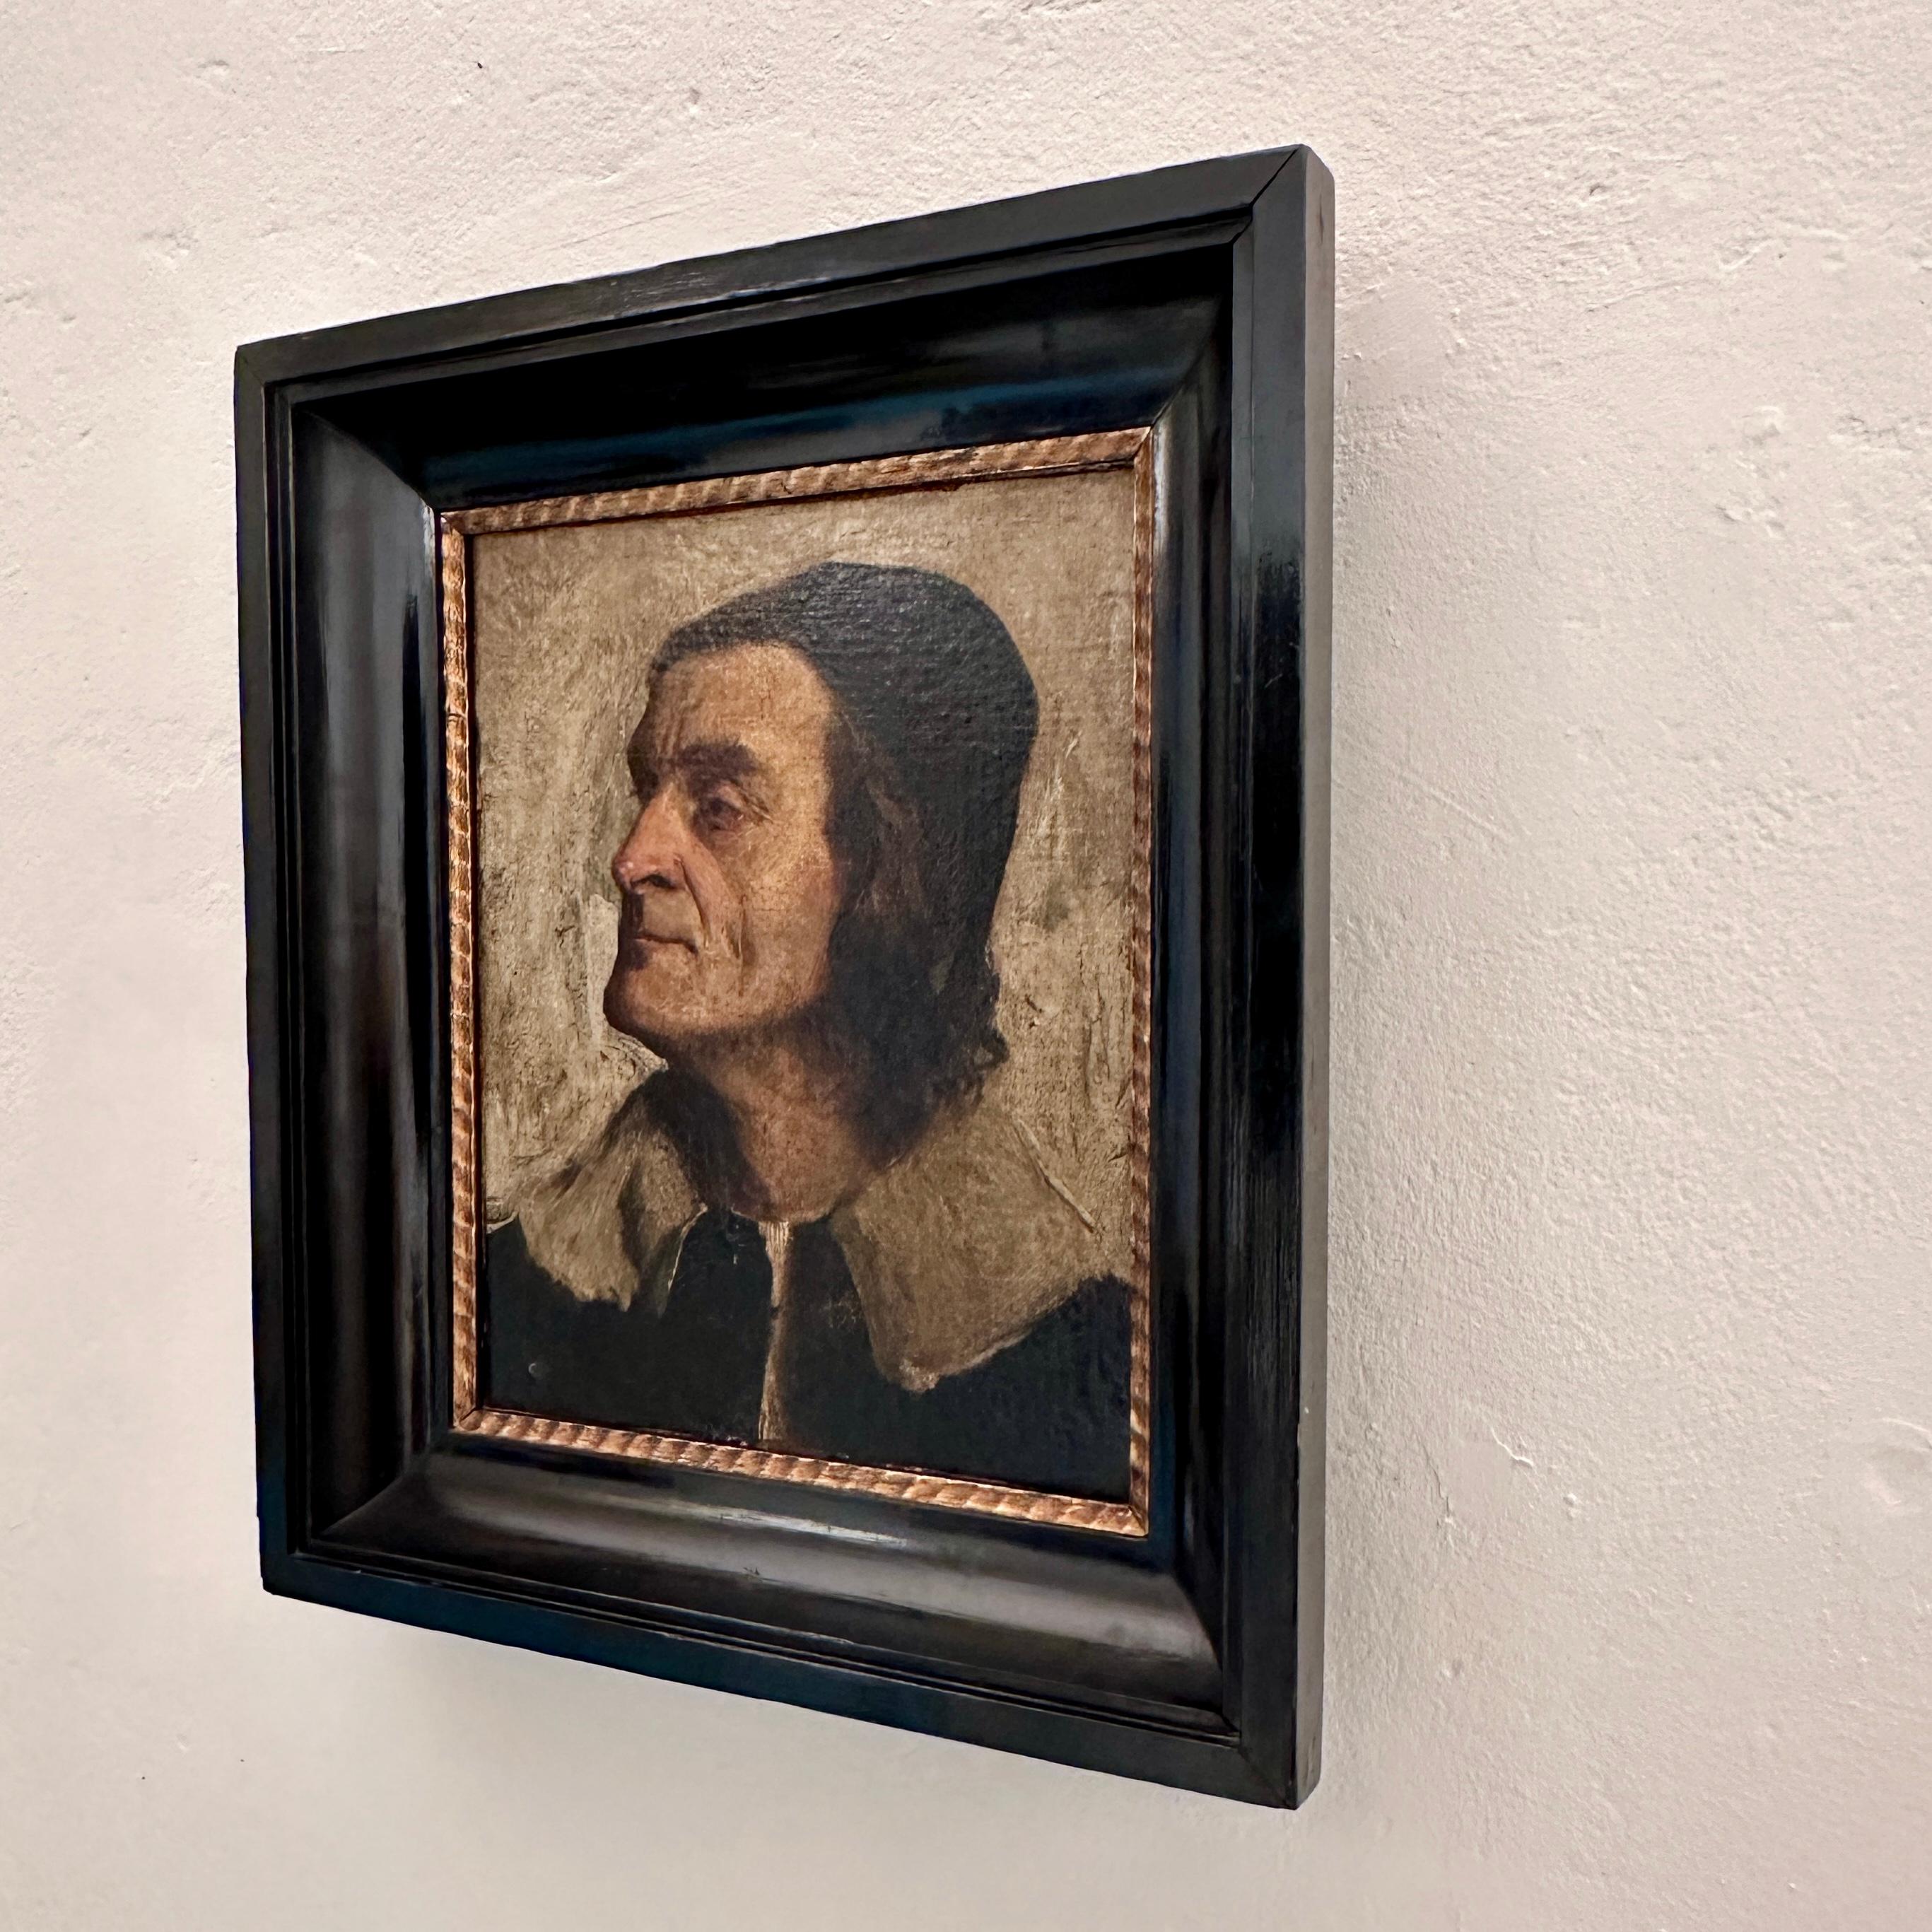 This beautiful 19th Century Portrait Oil Painting of Giuliano de Medici in a big black frame was painted 1885.
The canvas was at some point cut and glued onto a hardboard.
A unique piece which is a great eye-catcher for your antique, modern, space